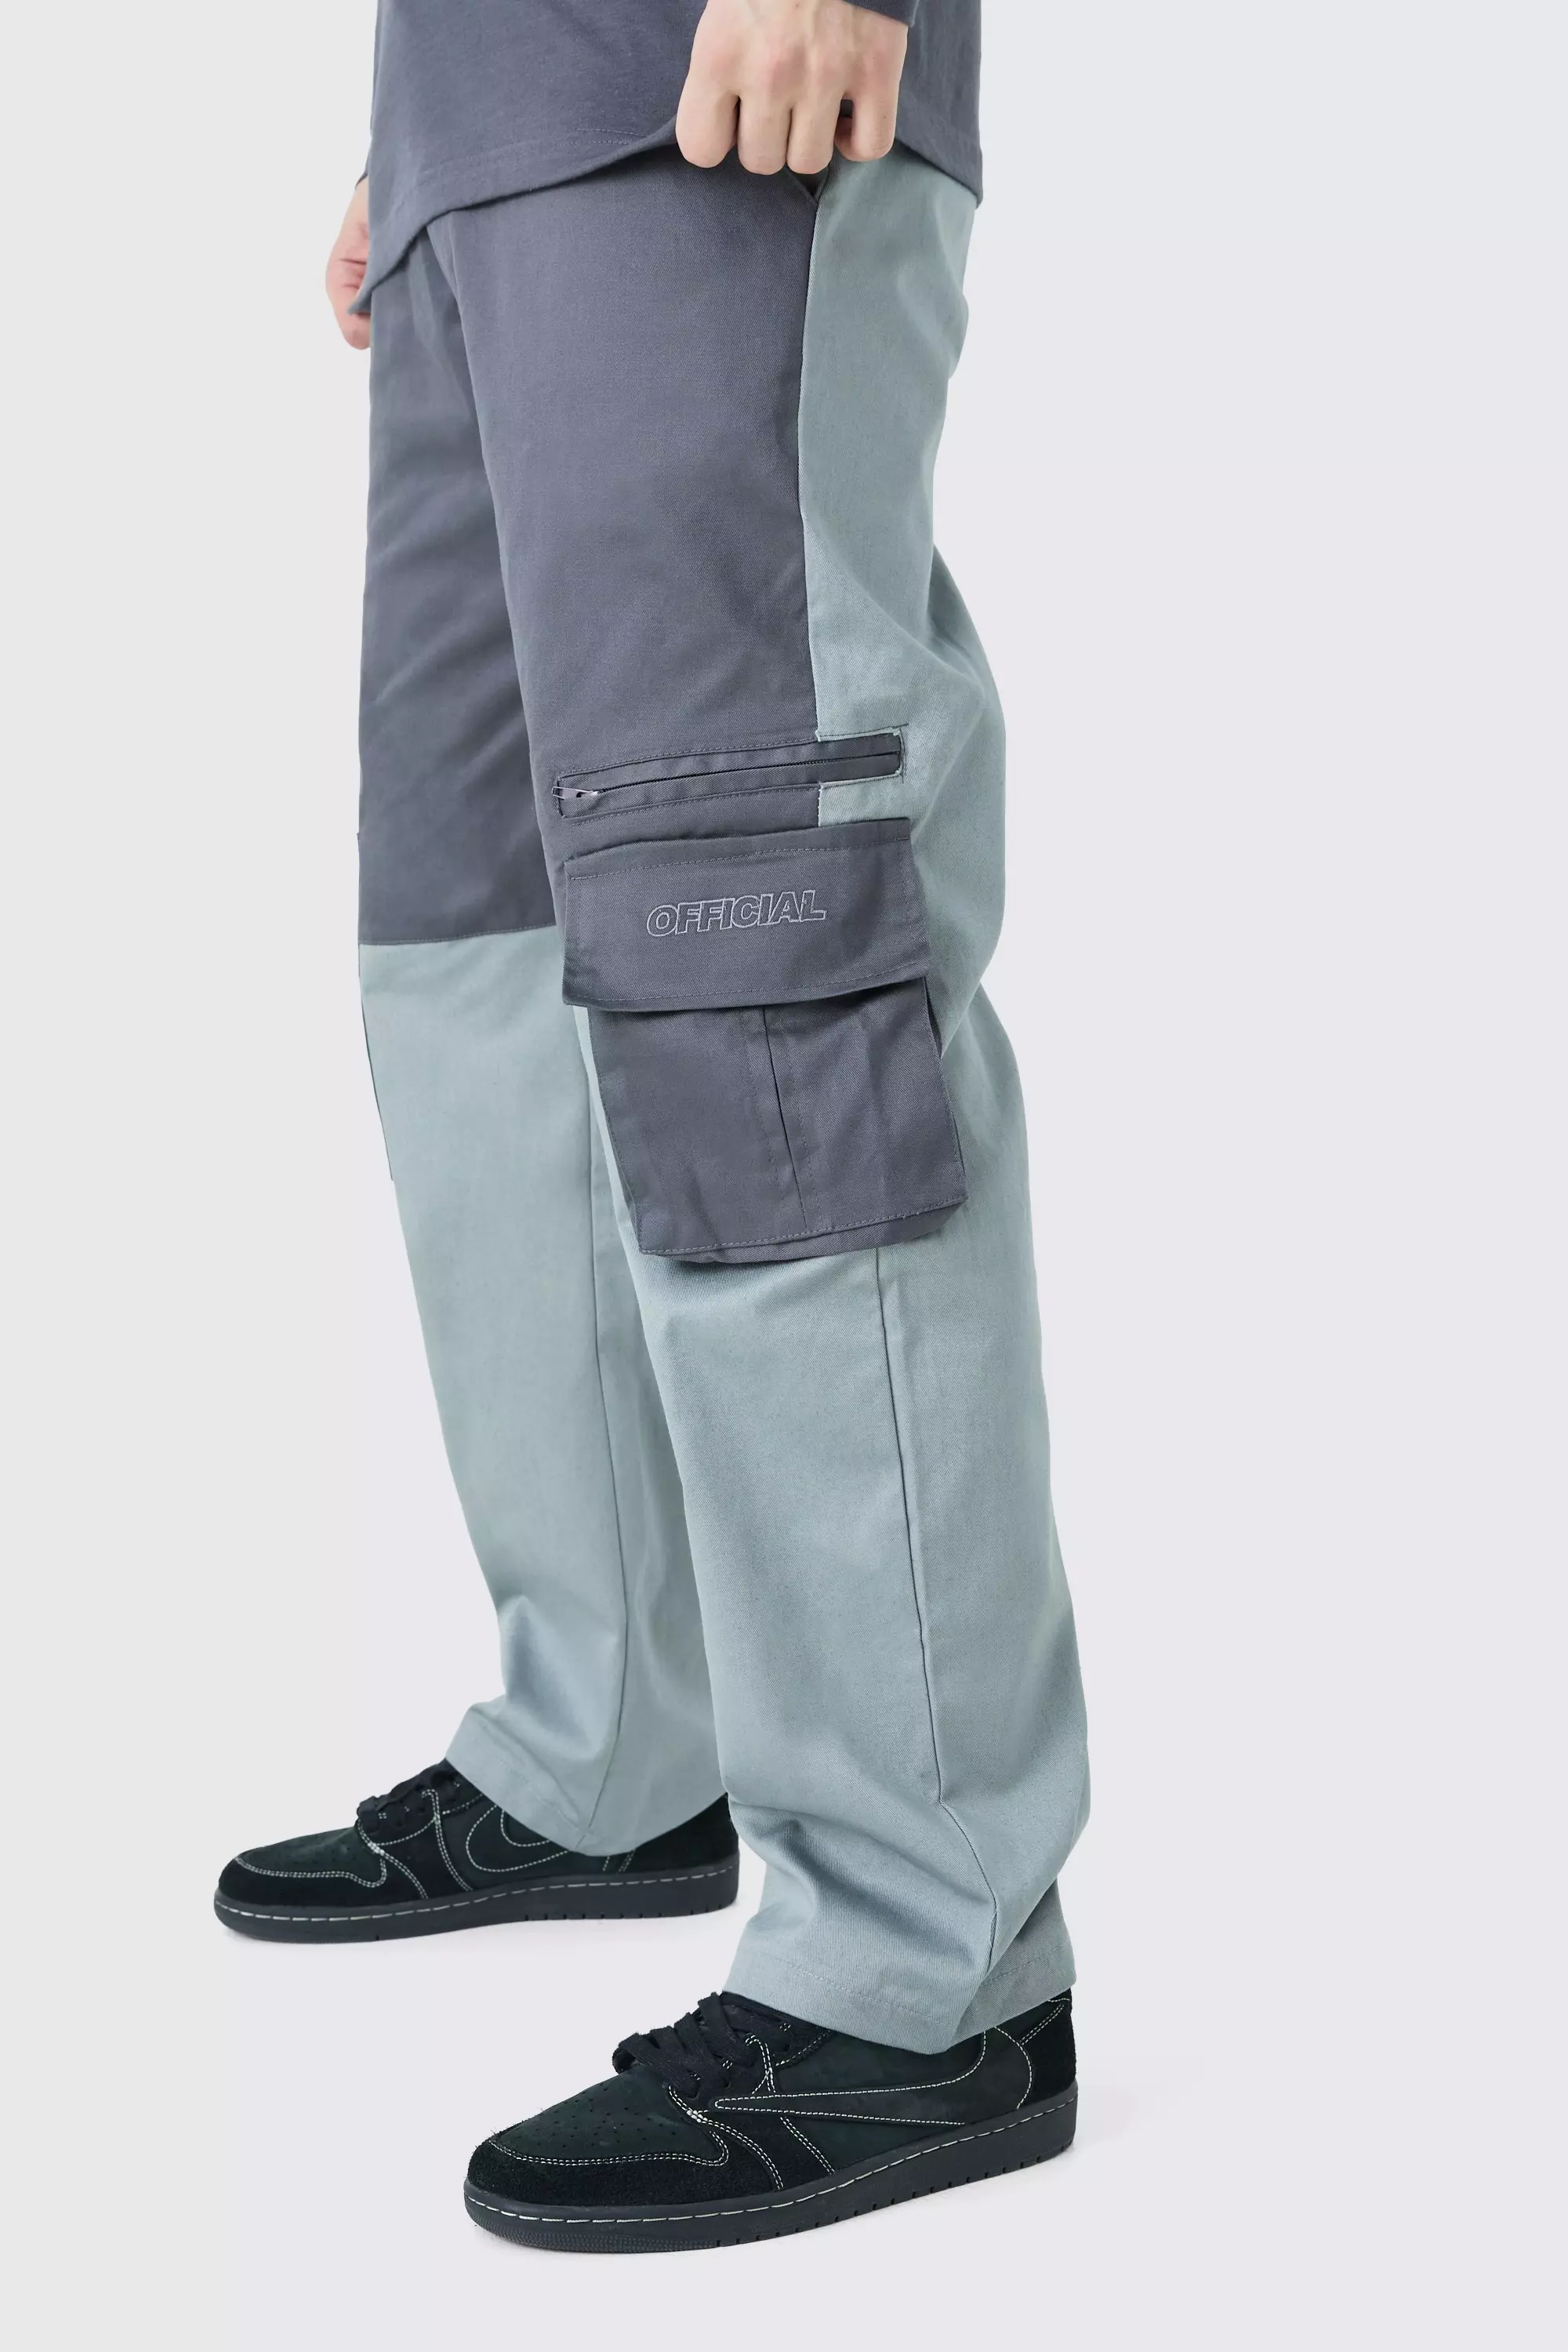 Charcoal Grey Tall Relaxed Fit Colour Block Official Branded Cargo Pants